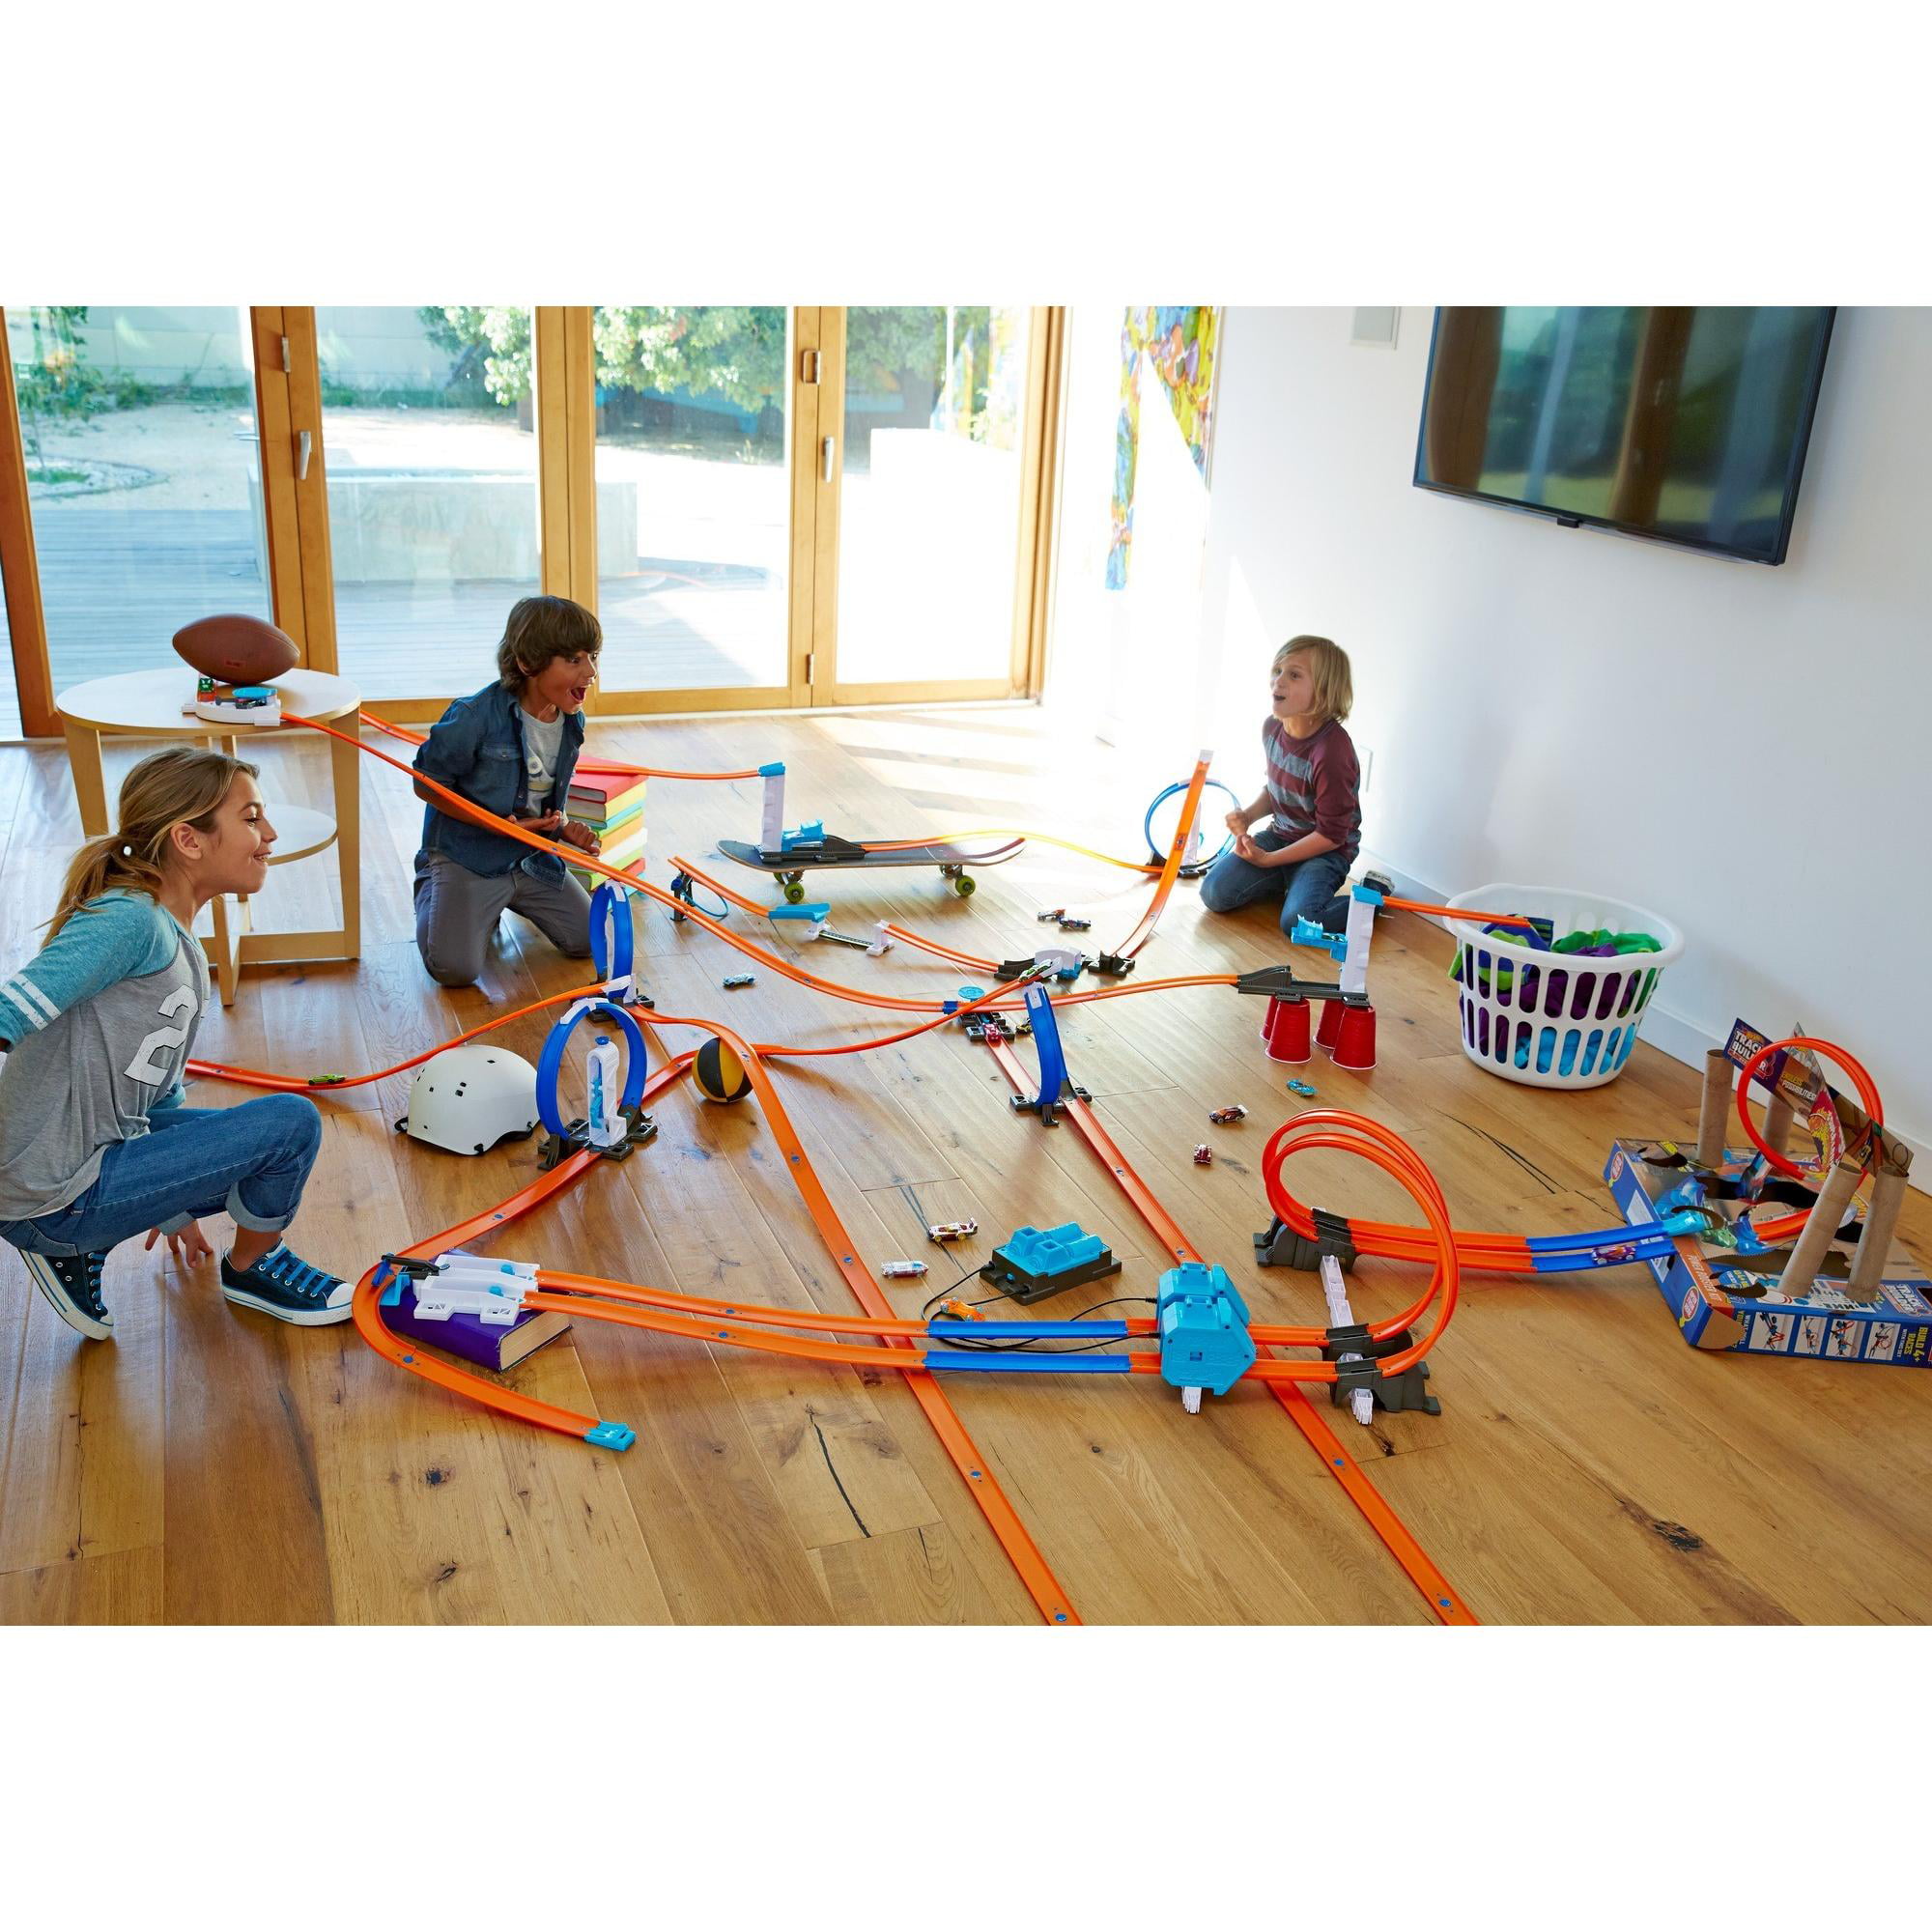 Track Builder Loop Launcher Playset Kids Vehice Trail System Creativity Toys New 